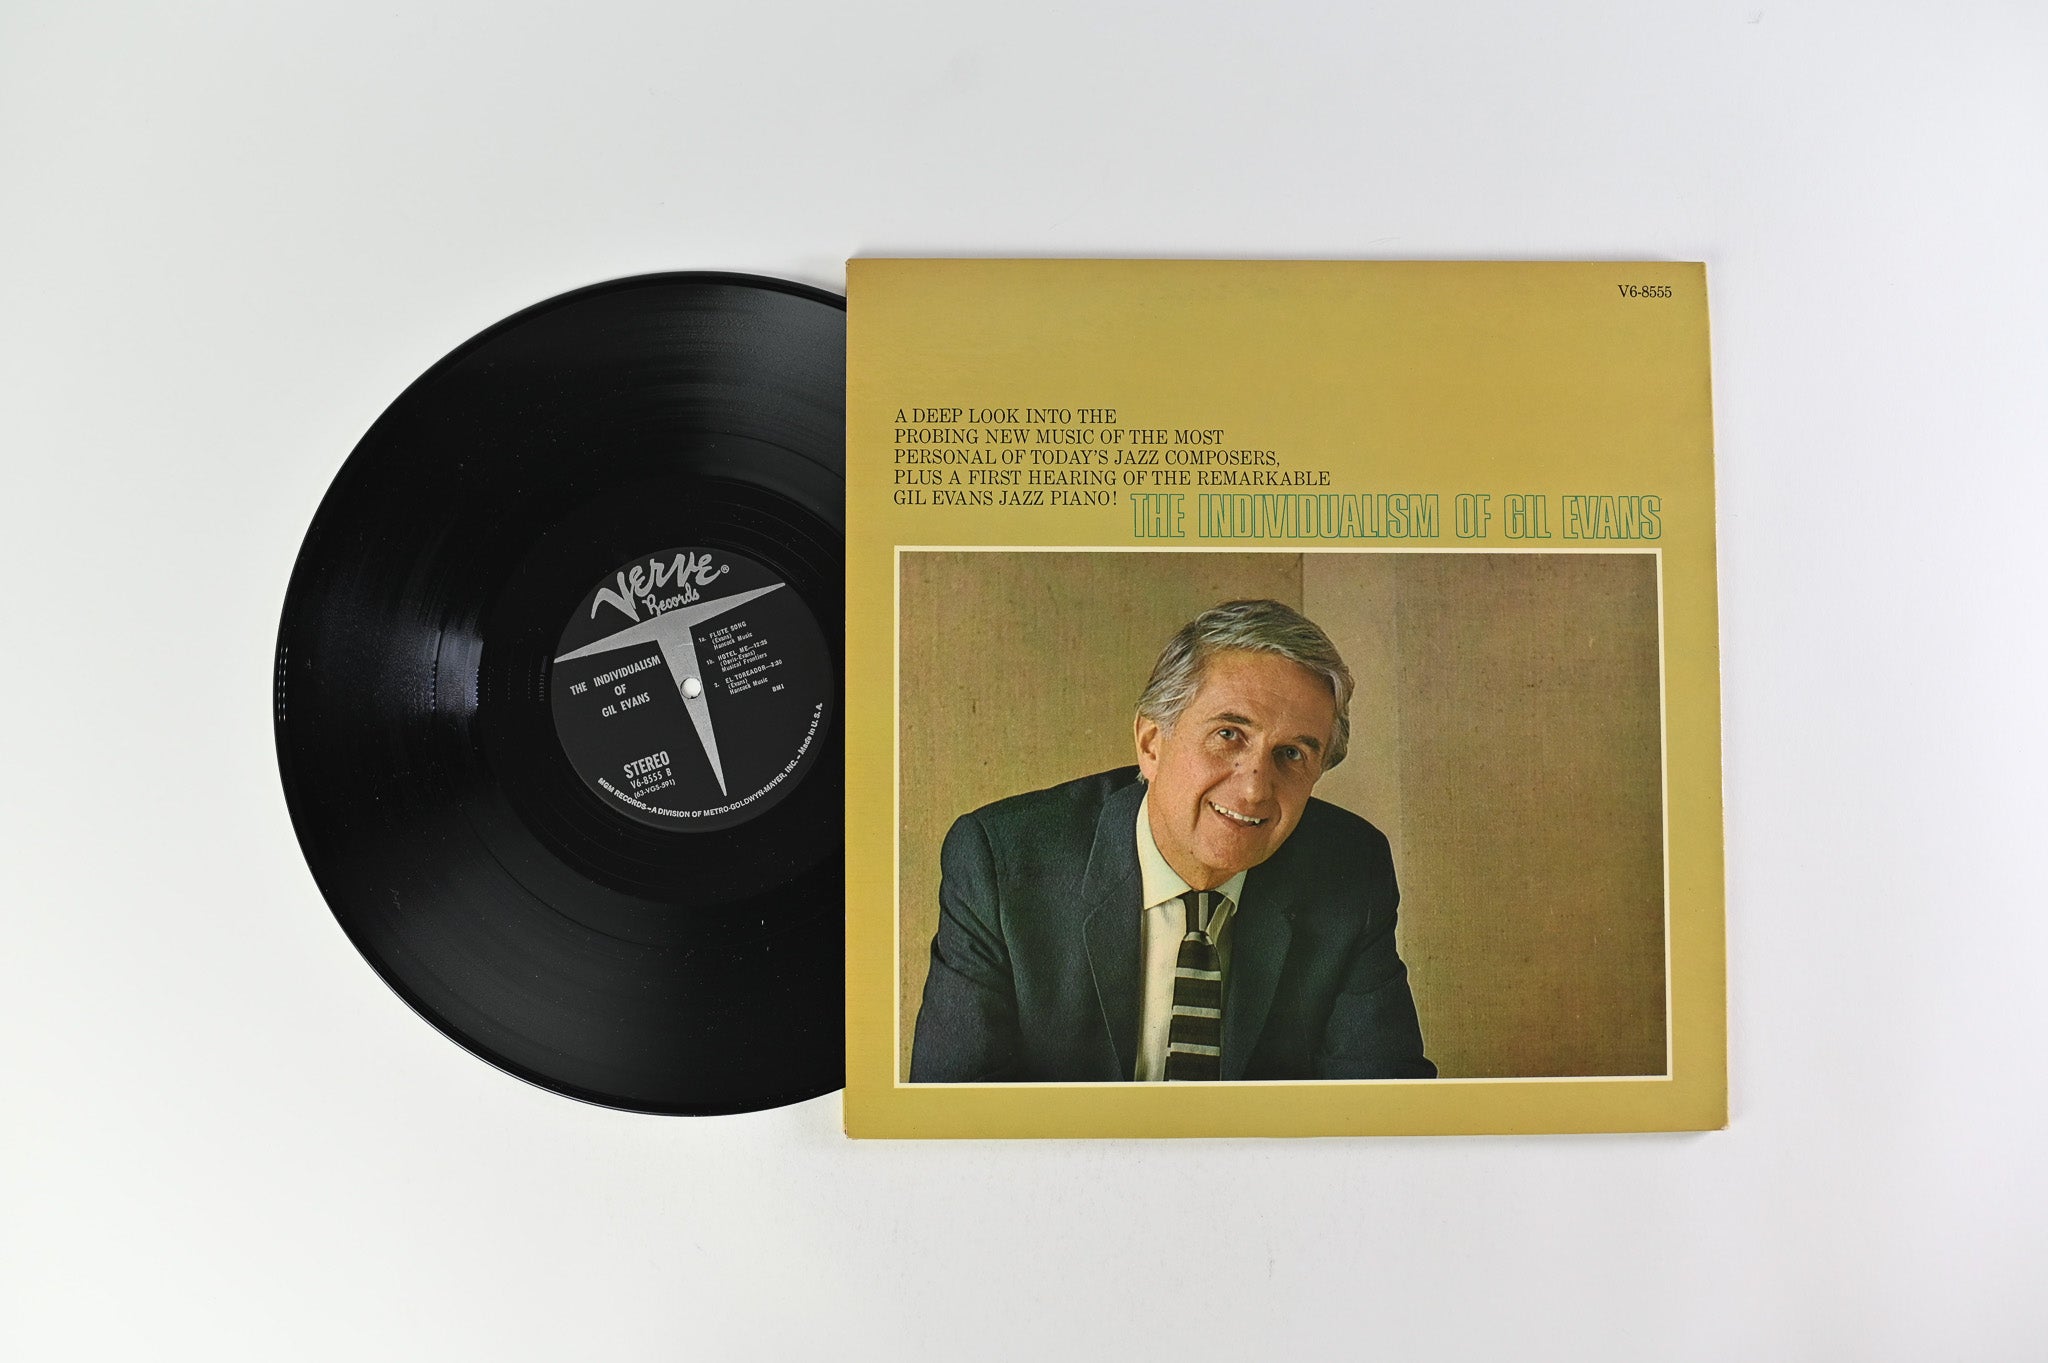 Gil Evans - The Individualism Of Gil Evans on Verve Records